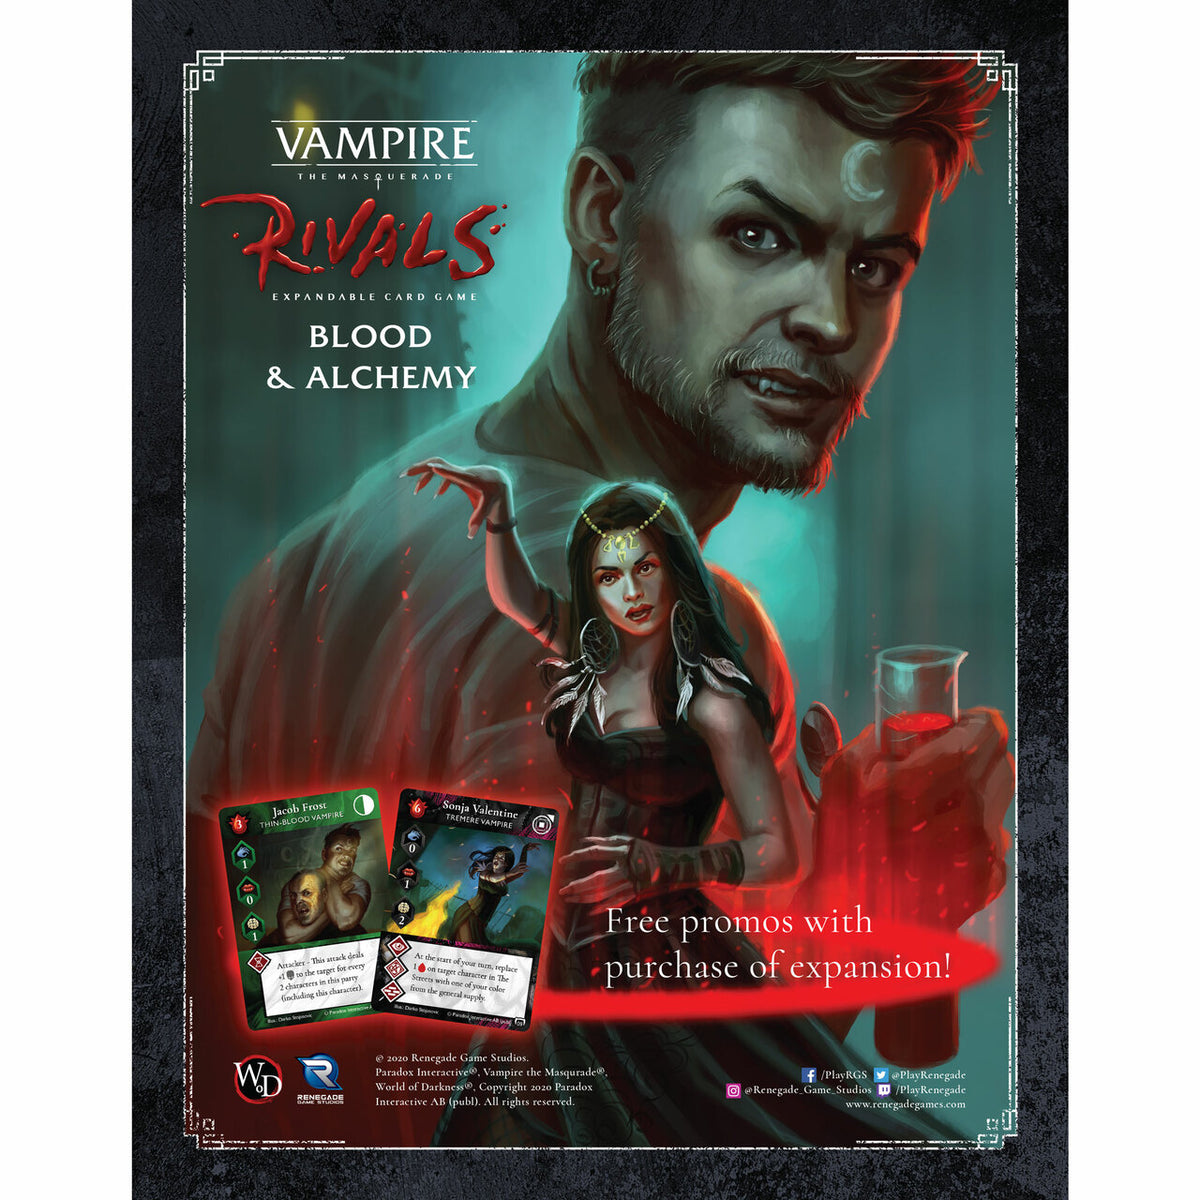 Vampire the Masquerade Rivals: The Wolf and The Rat Expansion